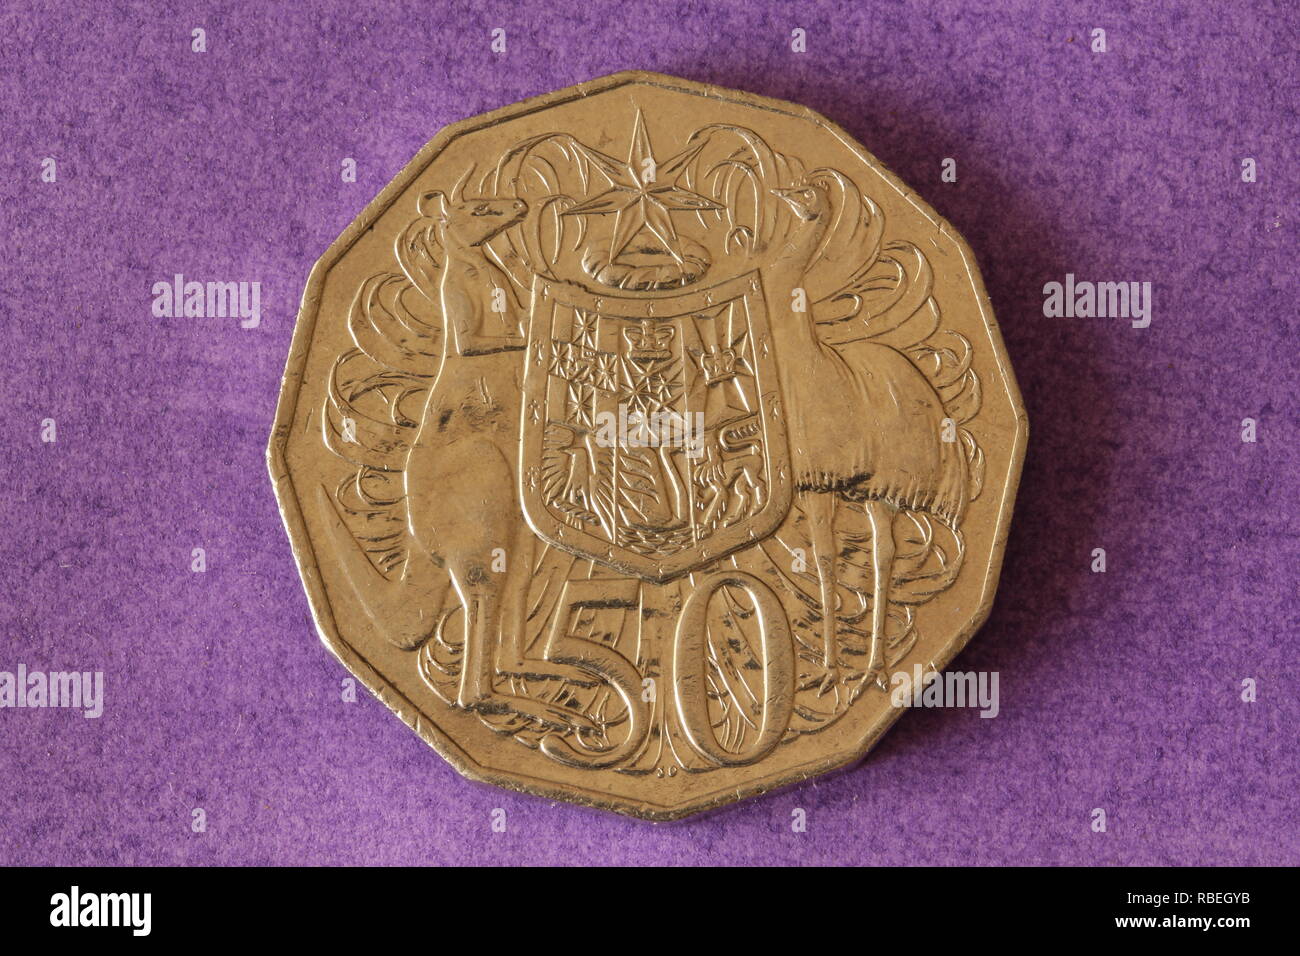 Australian Fifty Cent Coin High Resolution Stock Photography And Images Alamy